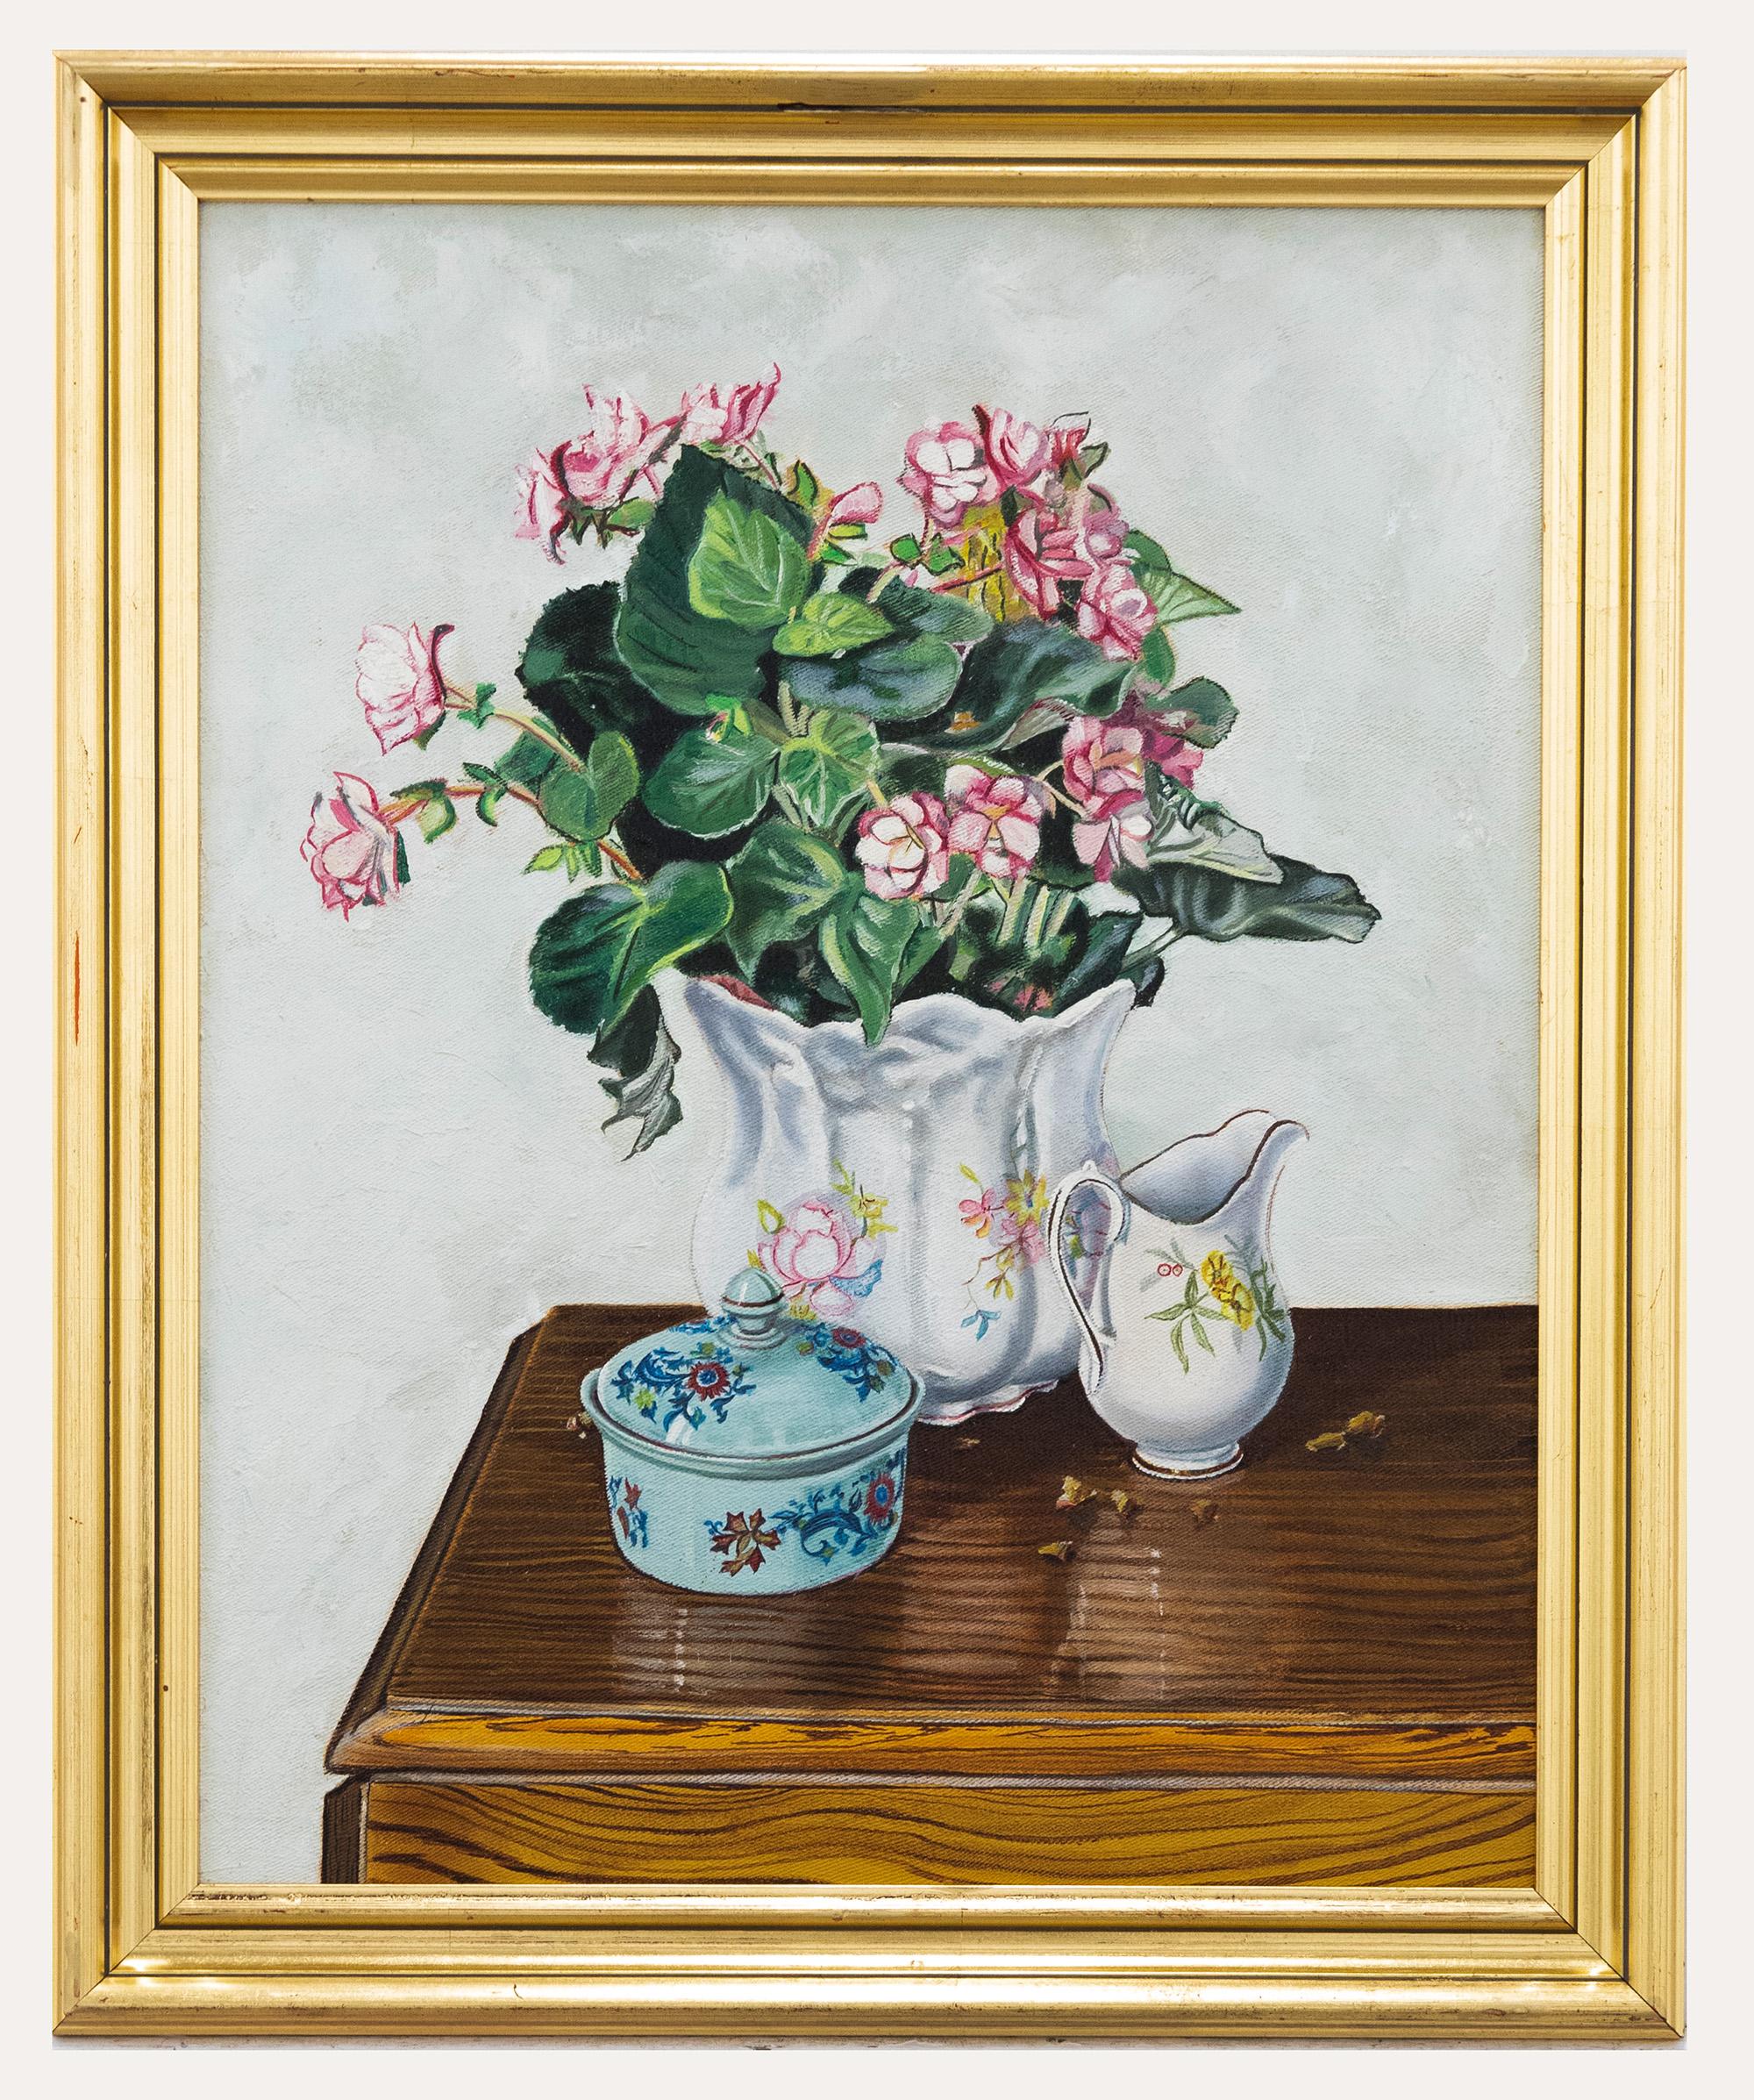 Unknown Still-Life Painting - Framed Contemporary Oil - Pink Begonia